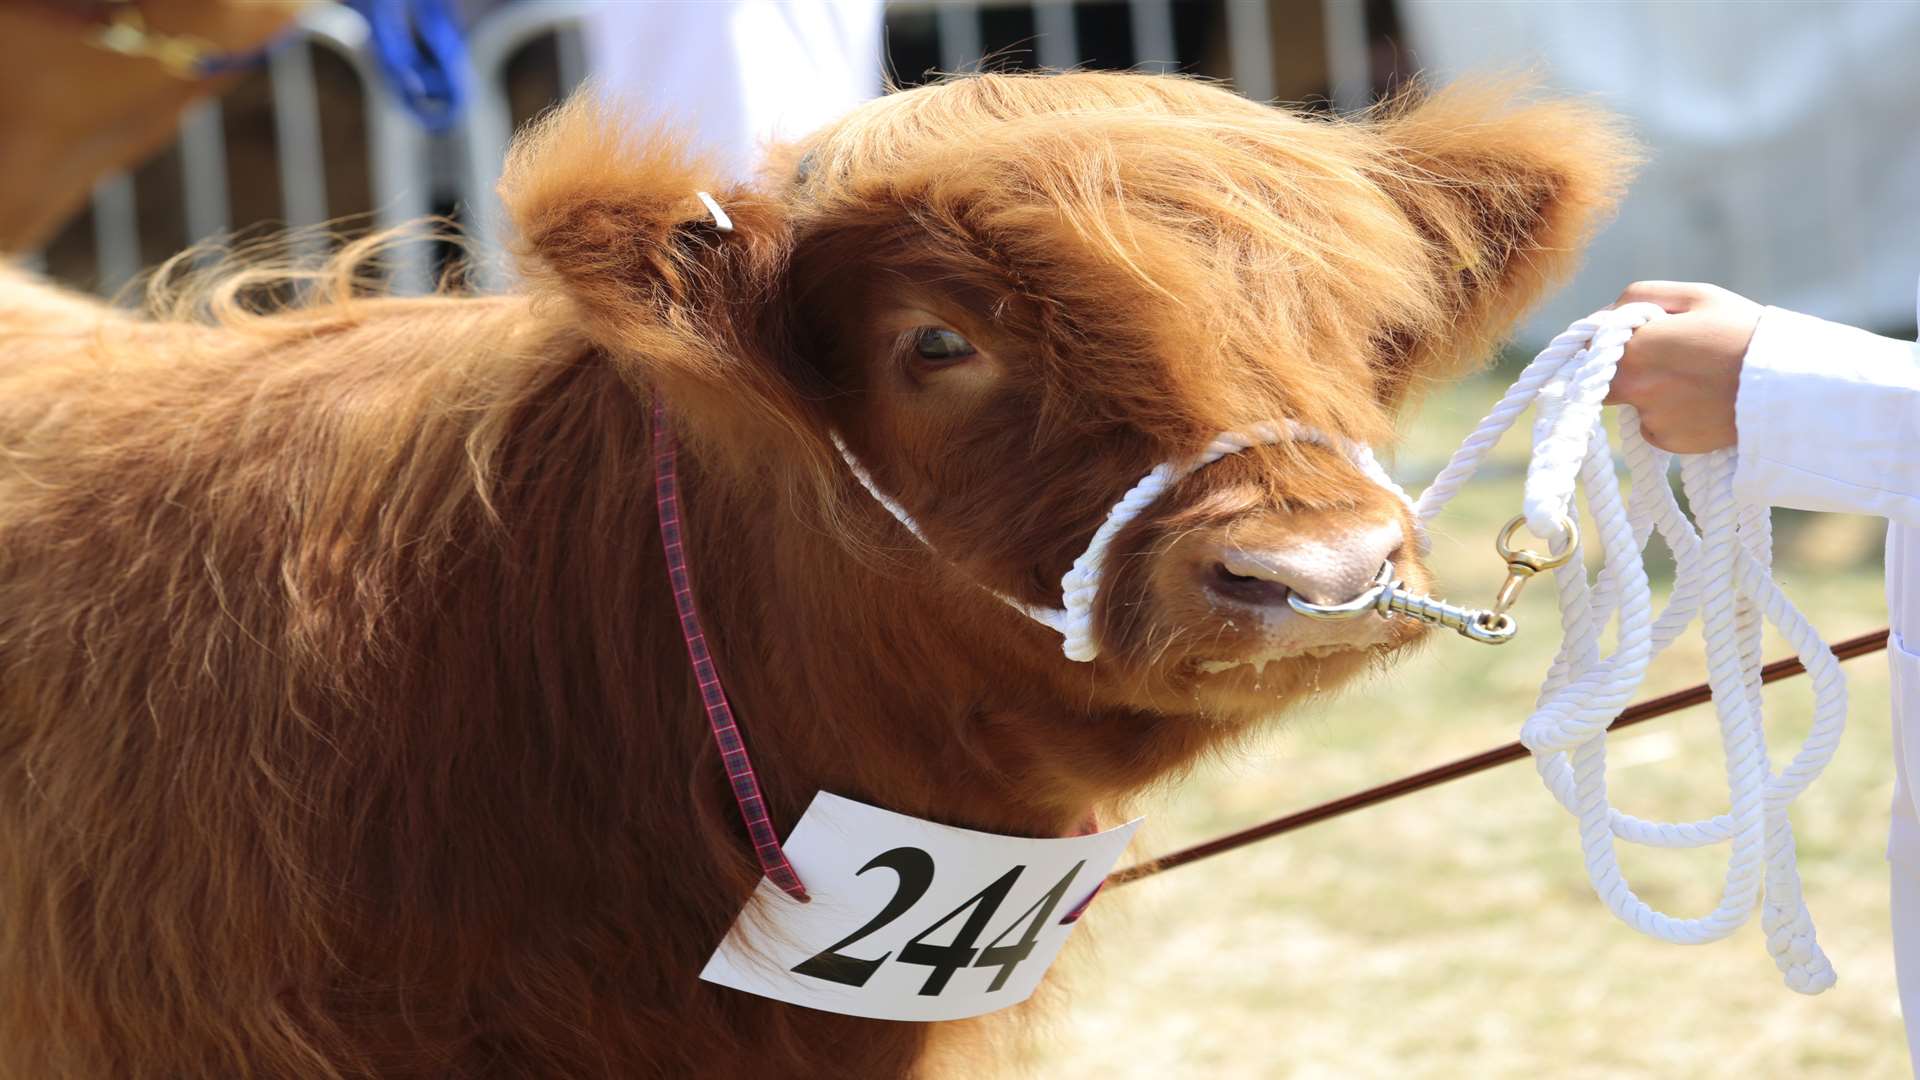 Livestock aren't the only attractions at the Kent County Show